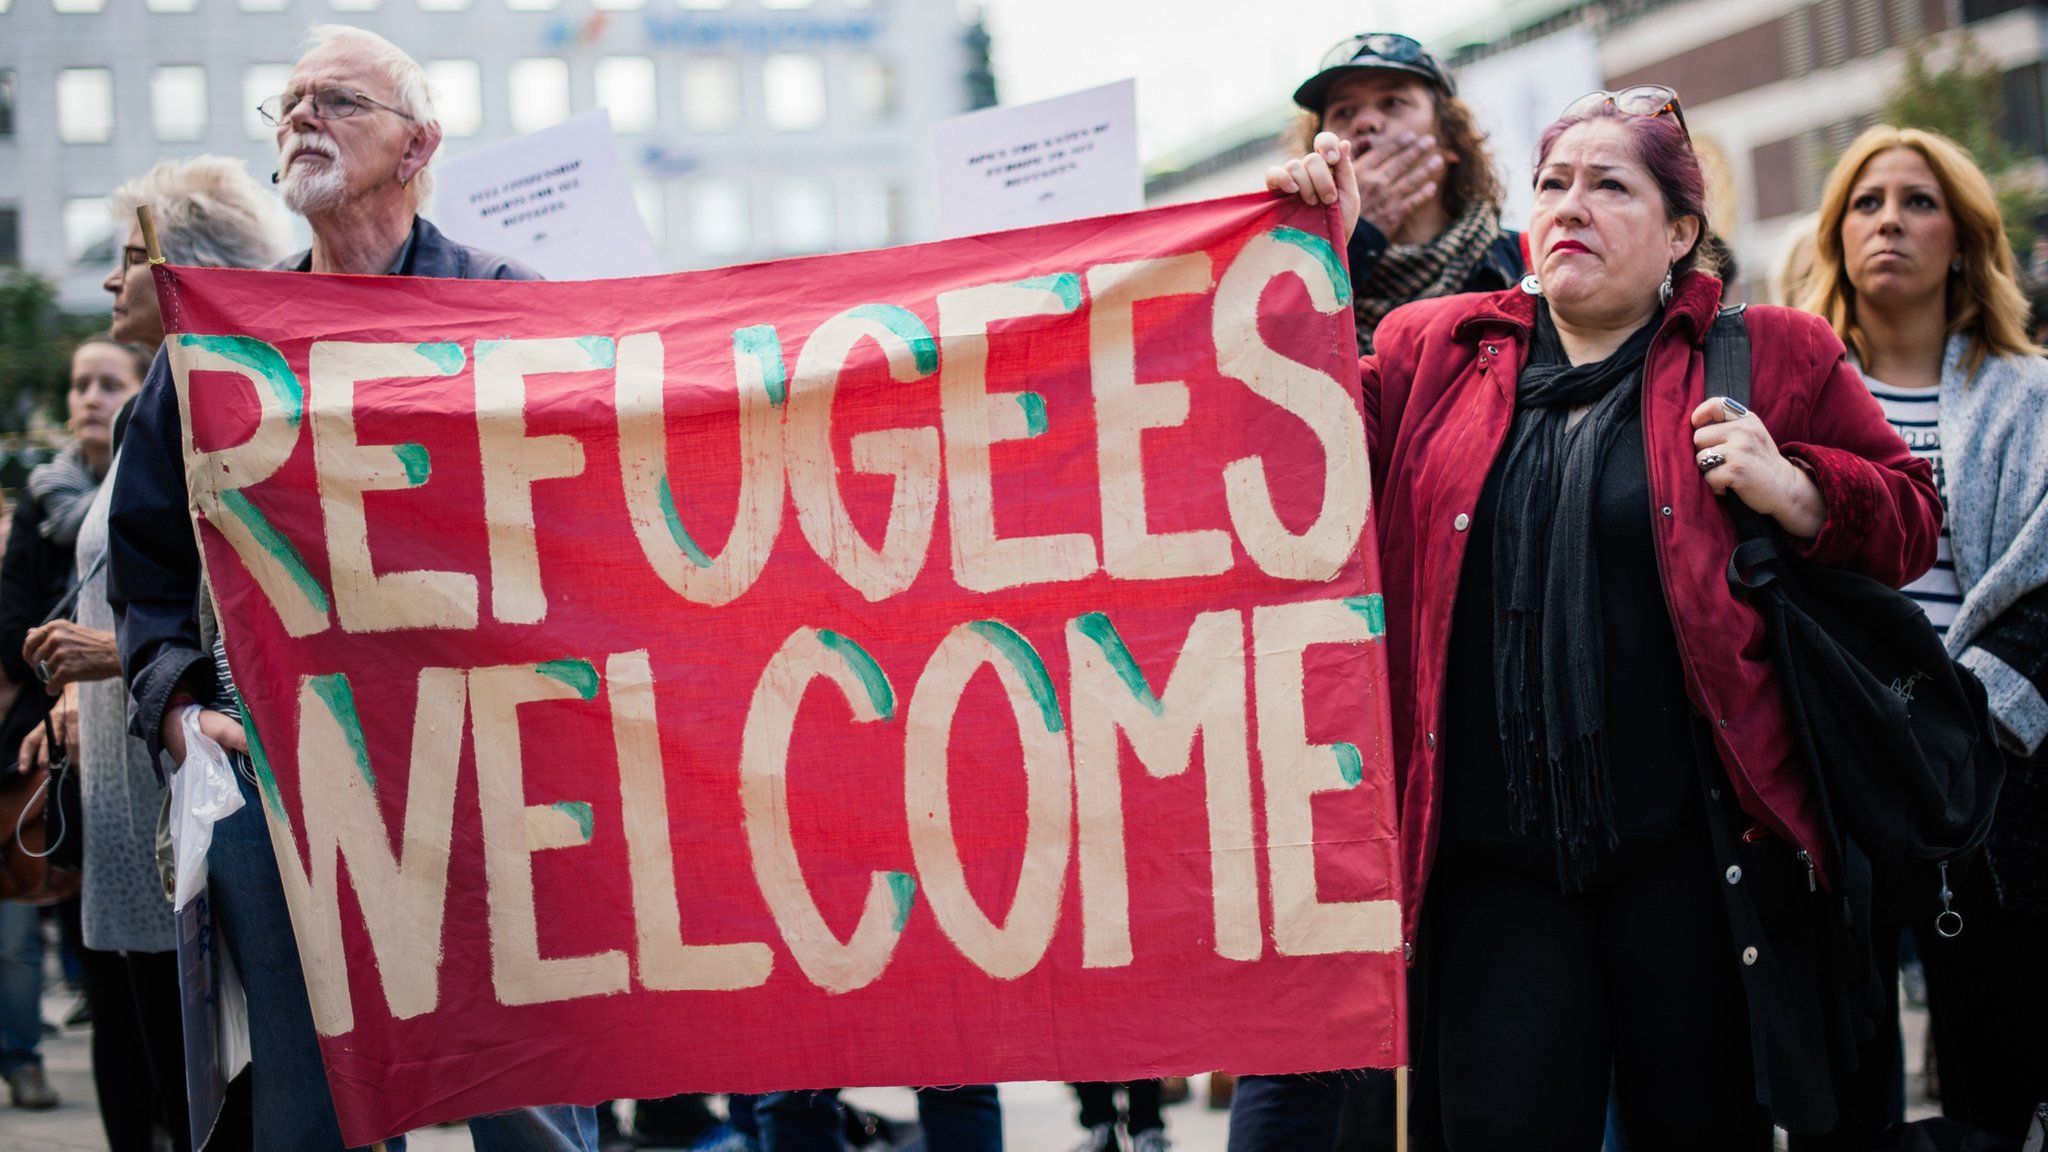 Swedish people showing their support for refugees